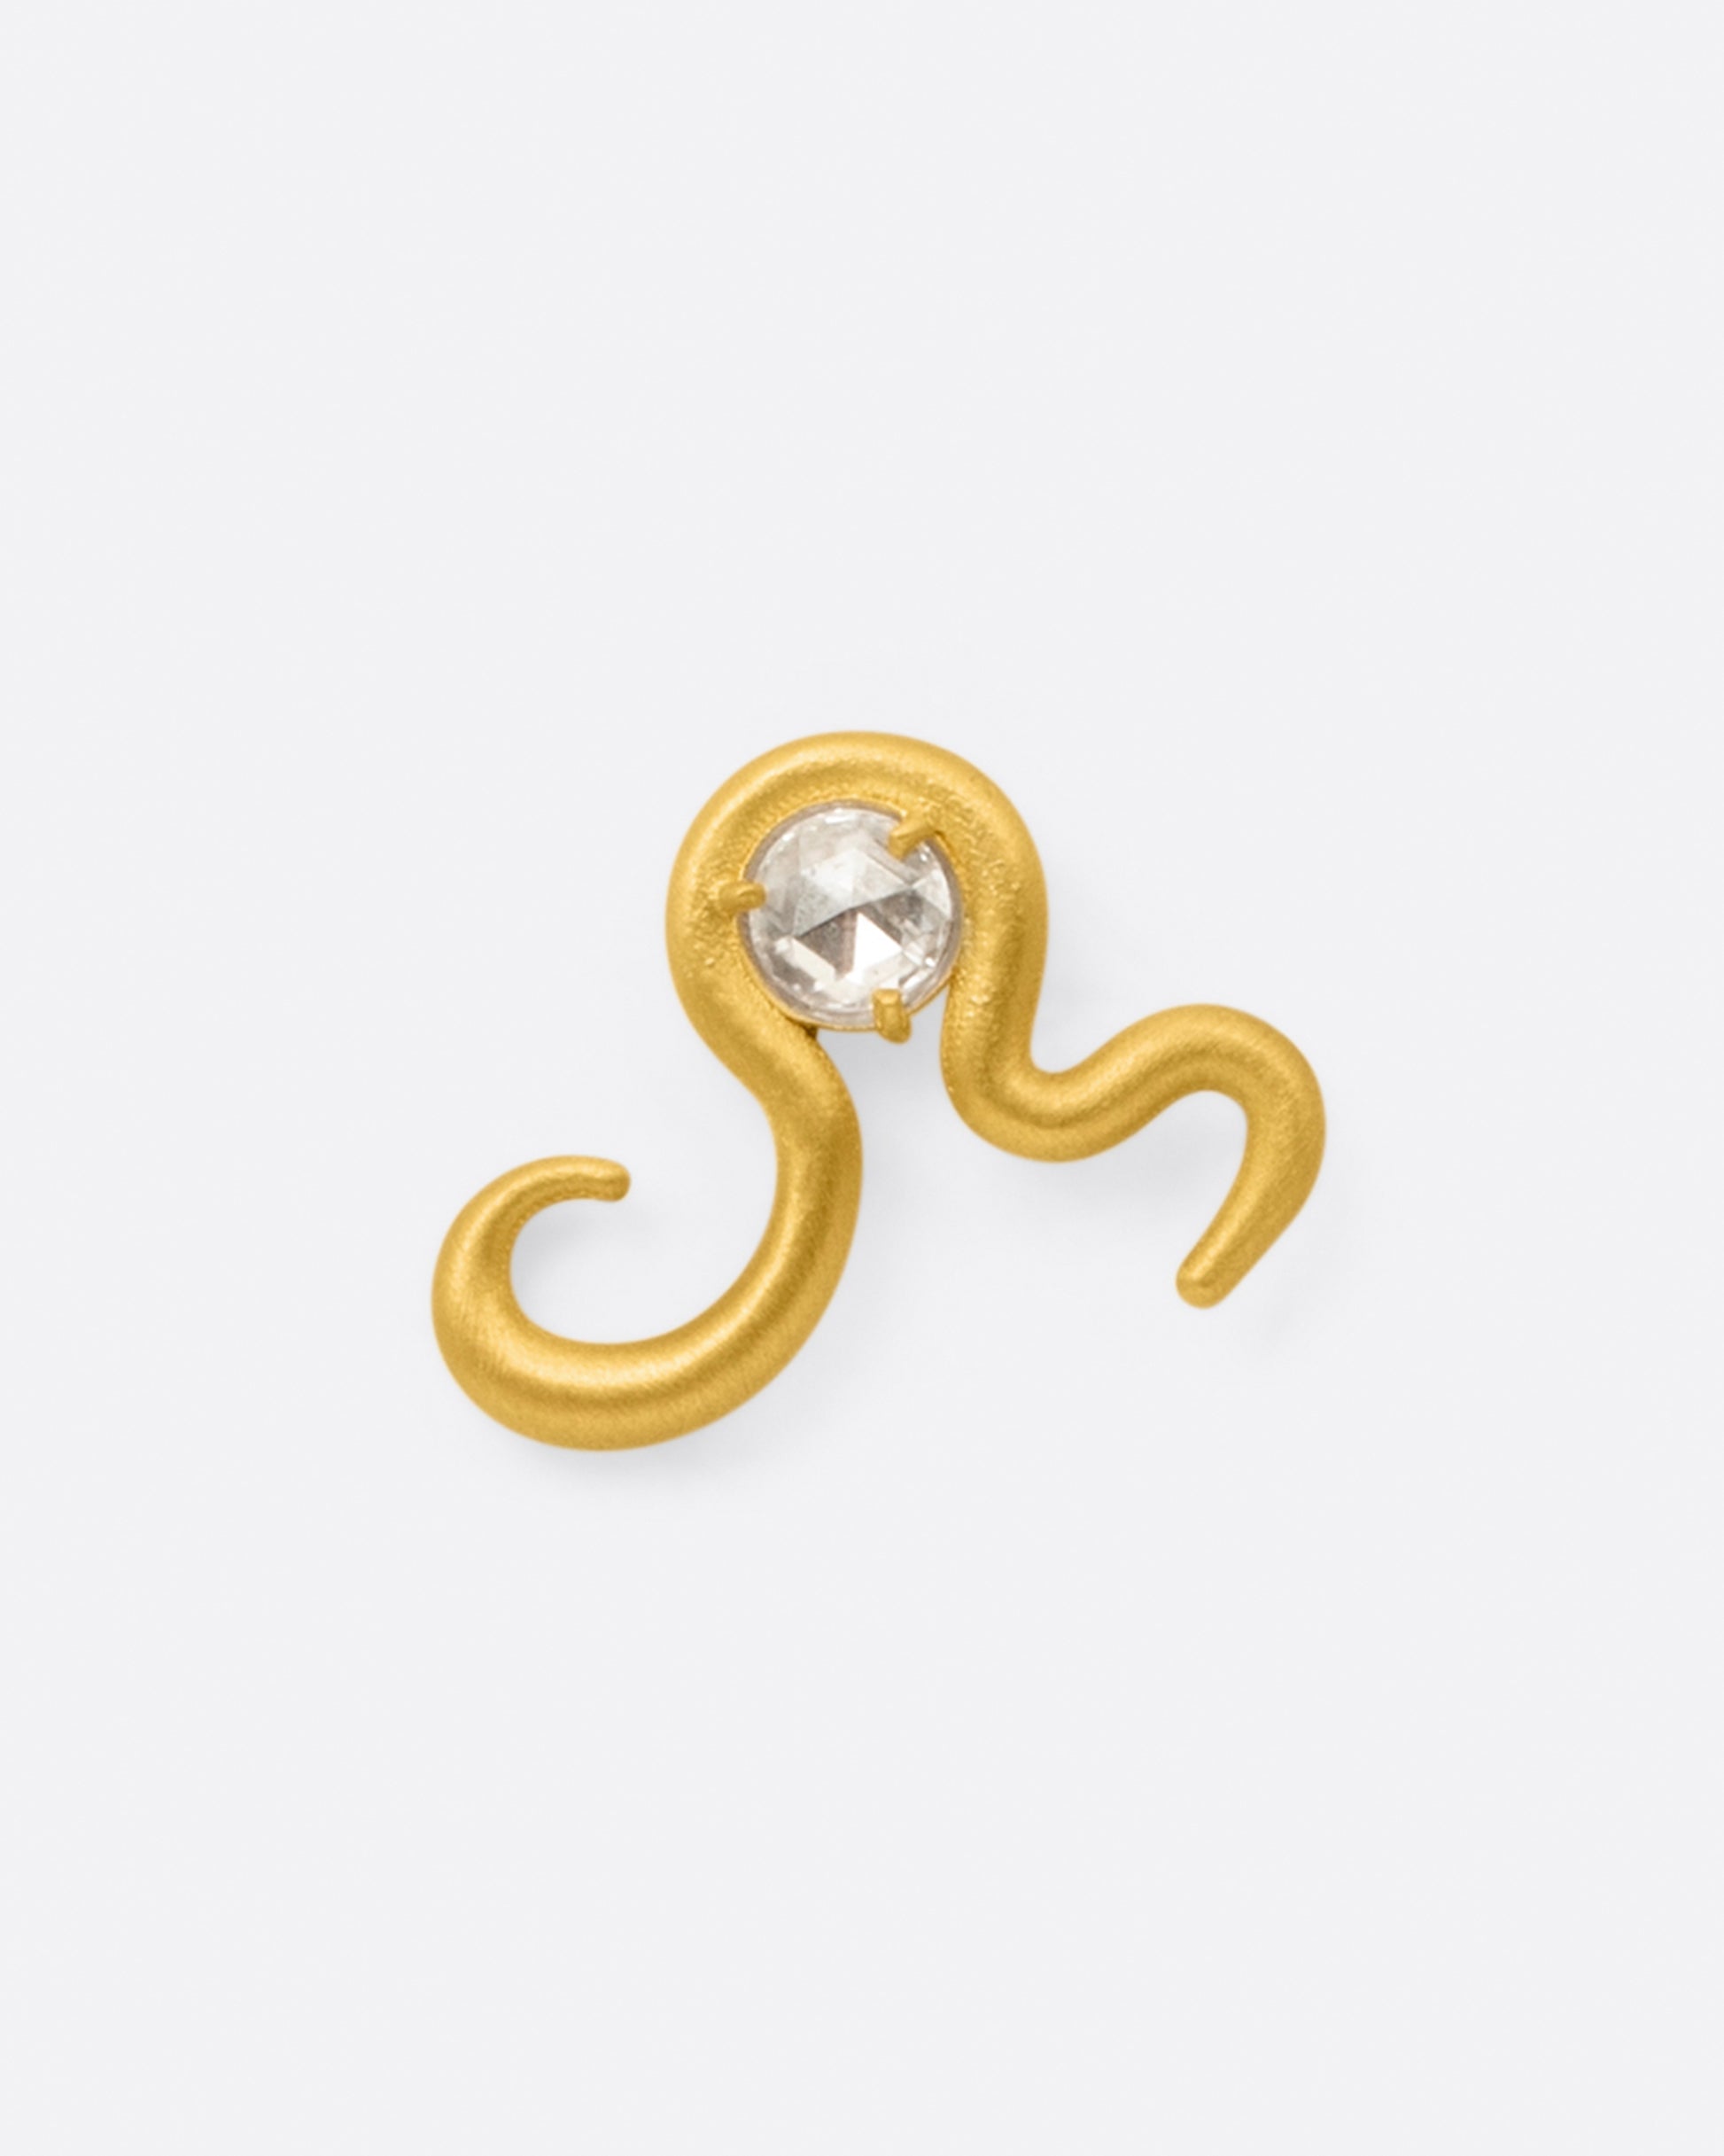 A high karat yellow gold curved snake stud earring with a rose cut diamond at its center, shown from the front.